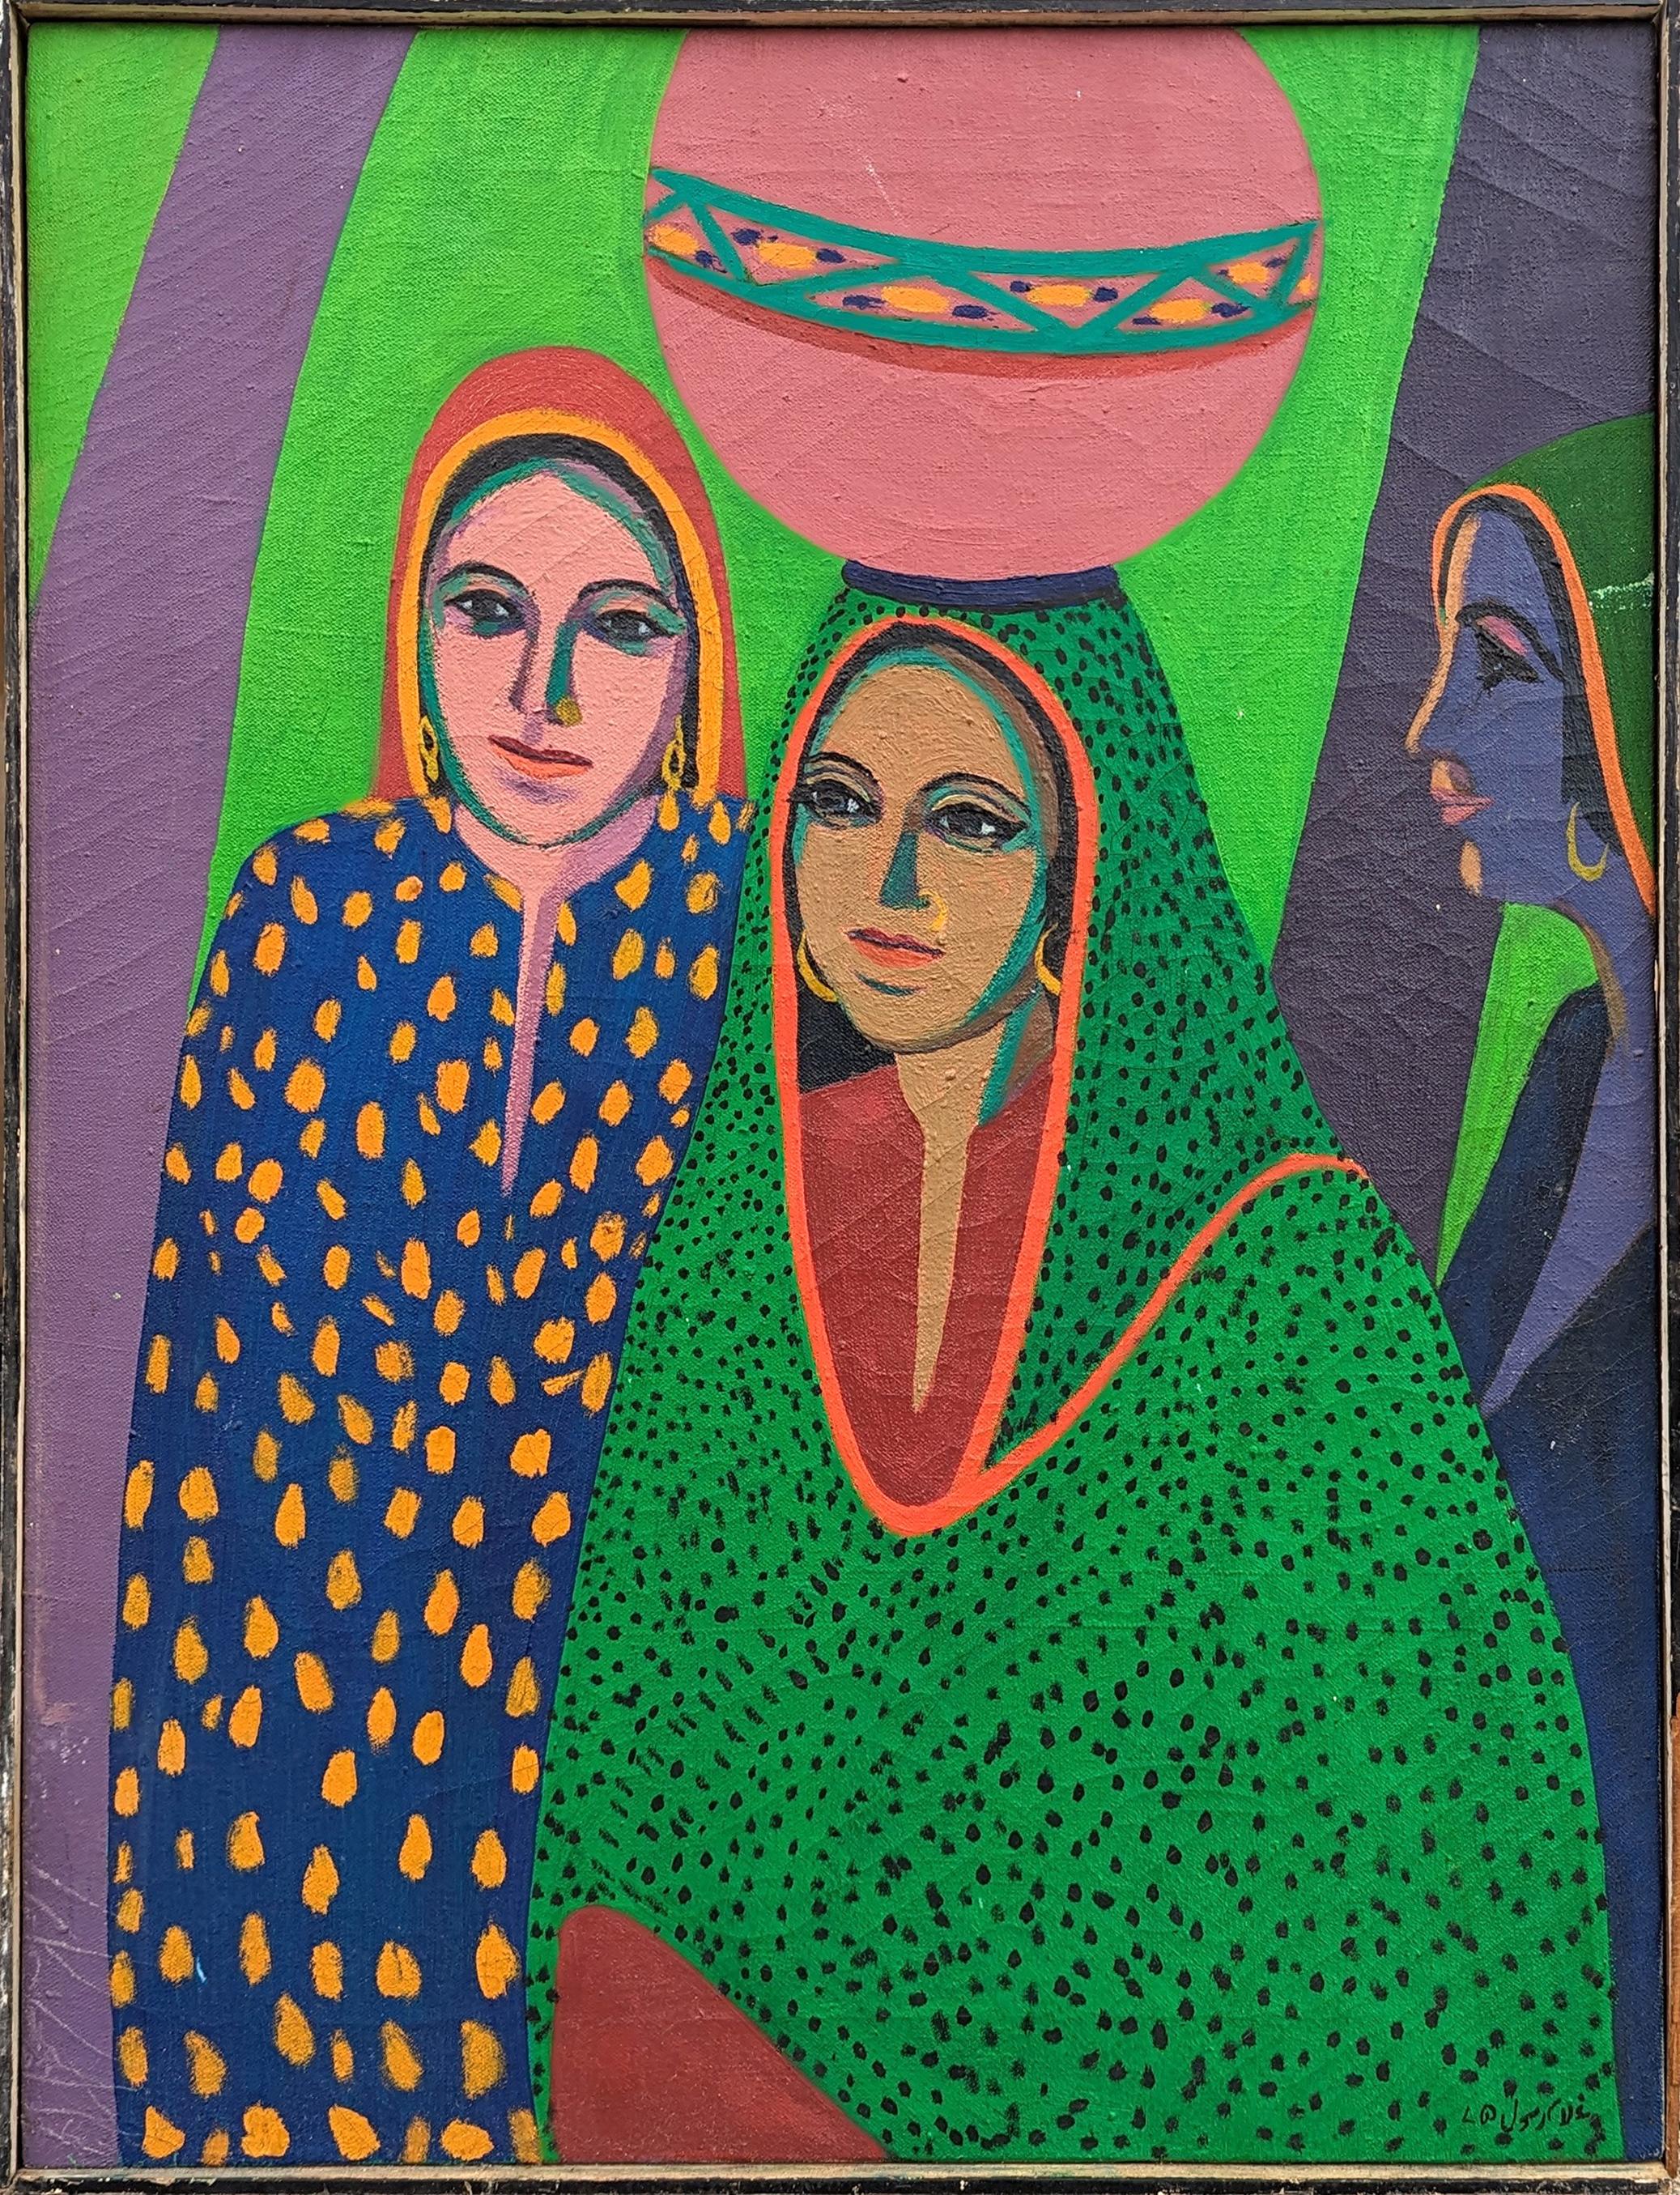 Ghulam Rasul Abstract Painting - "Three Girls" Modern Figurative Abstract Green, Pink, and Purple Toned Painting